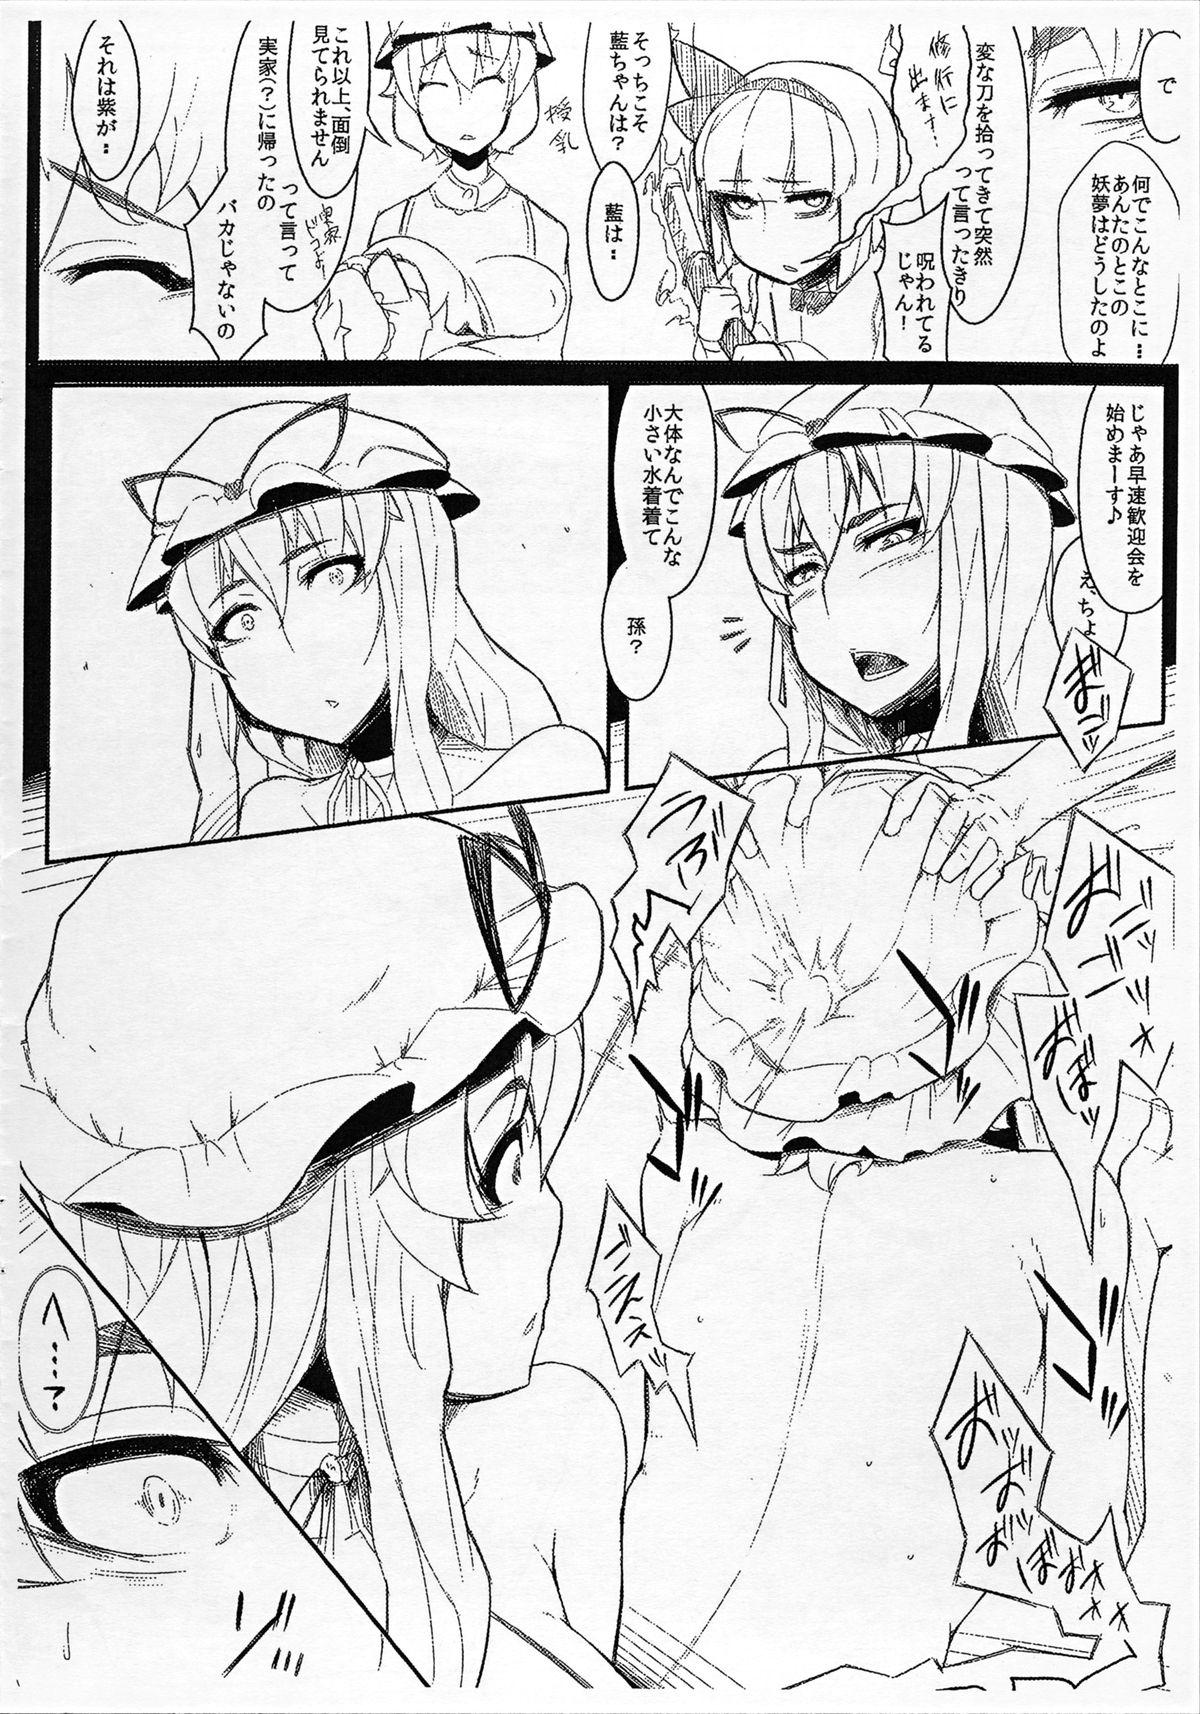 Chibola Toshimaen e Youkoso Vol. 0 - Touhou project Free Oral Sex - Page 3